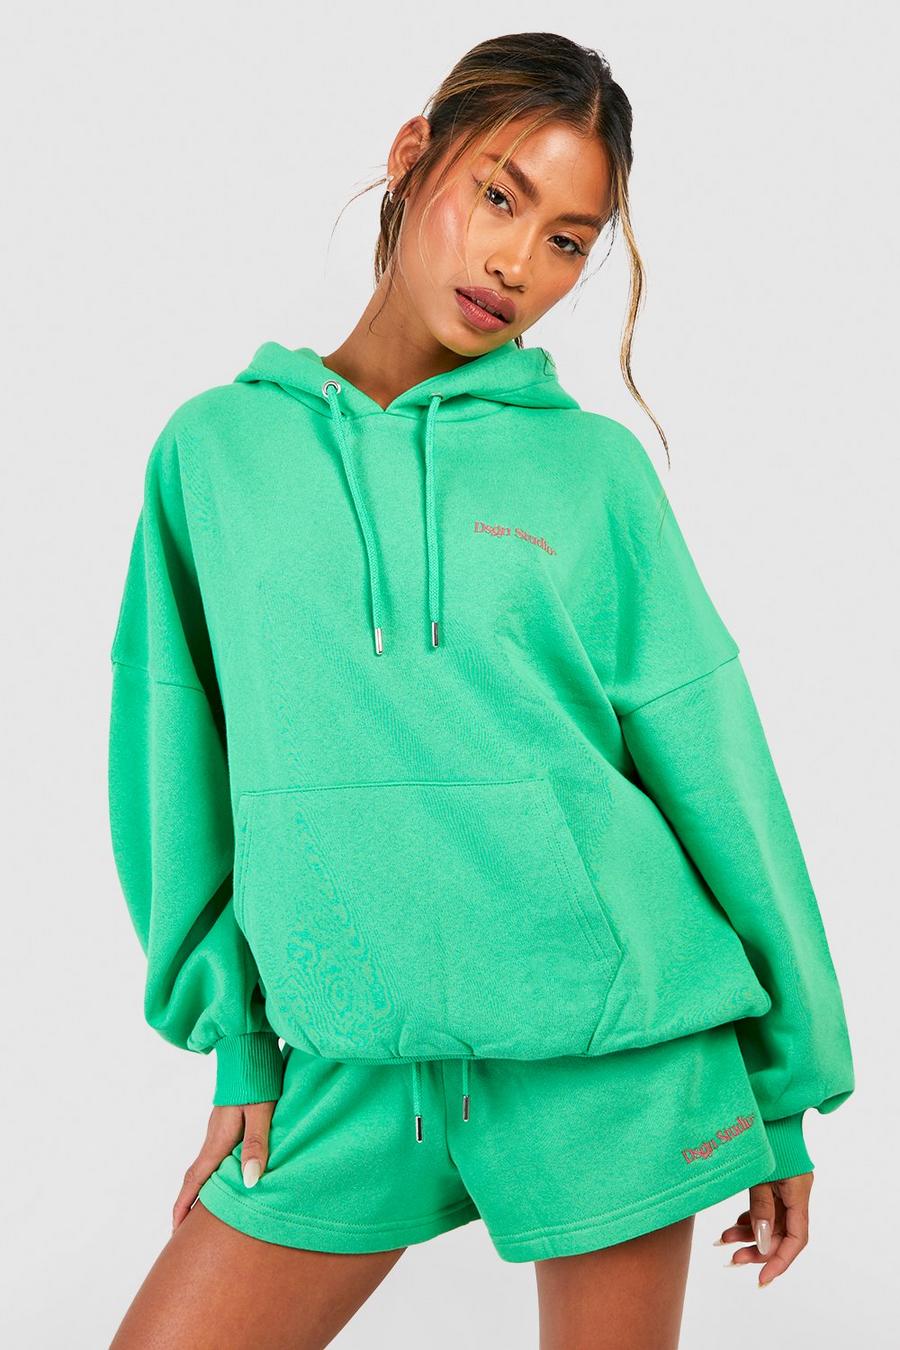 Green Dsgn Studio Embroidered Short Tracksuit